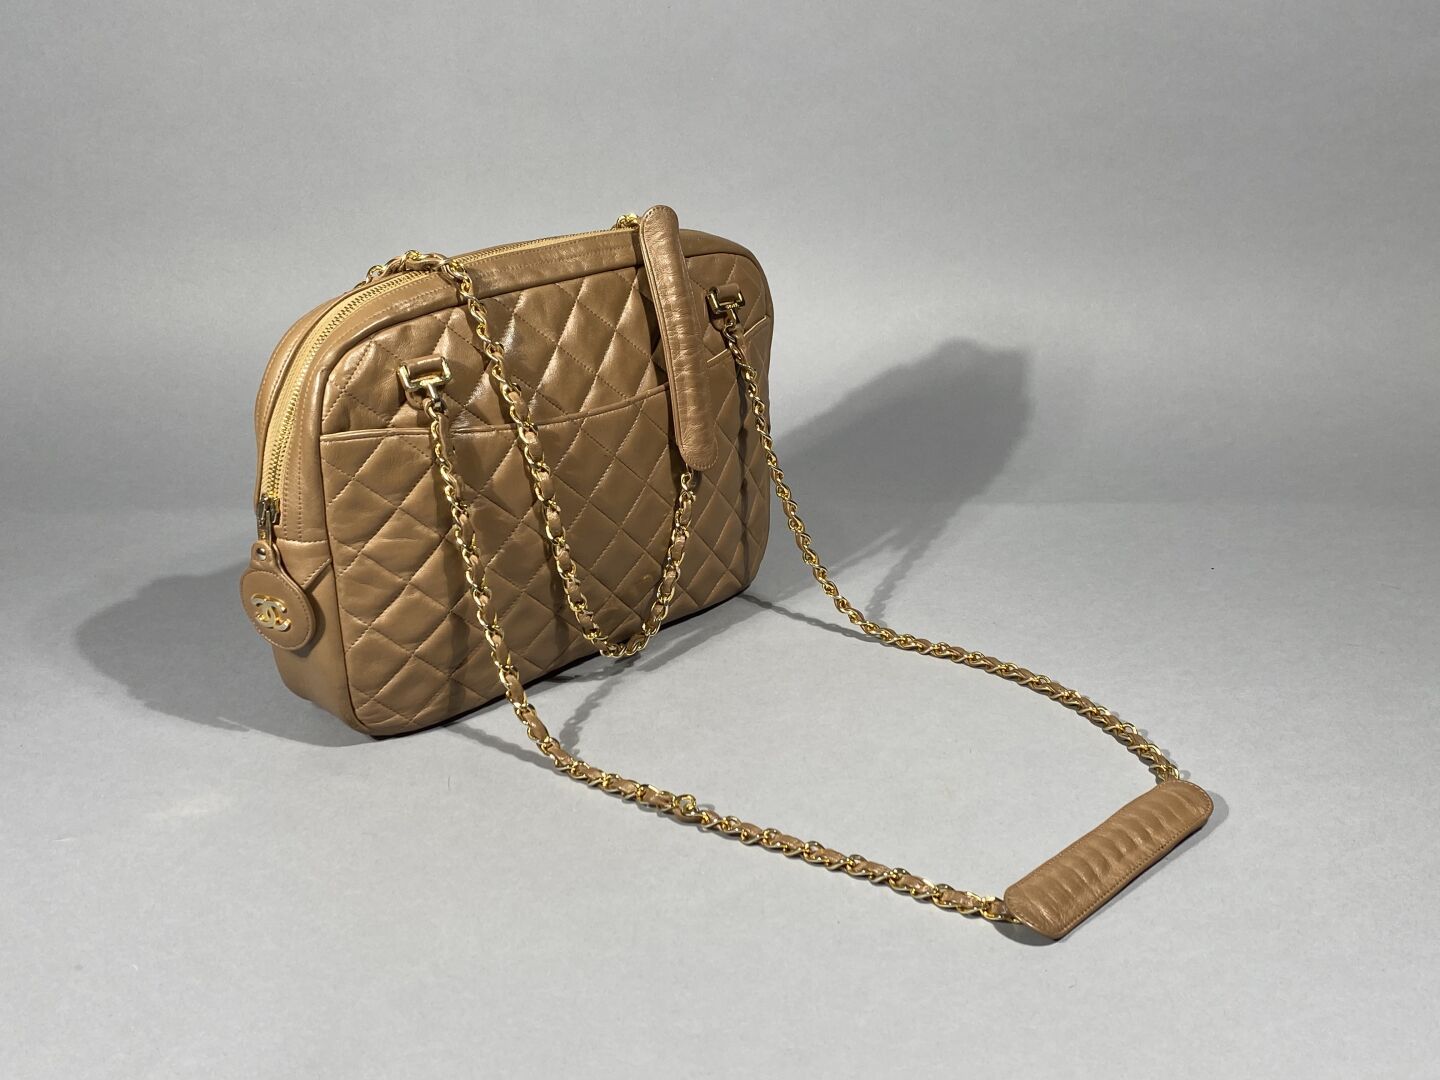 Chanel, Bag model Camera in beige quilted lambskin, …